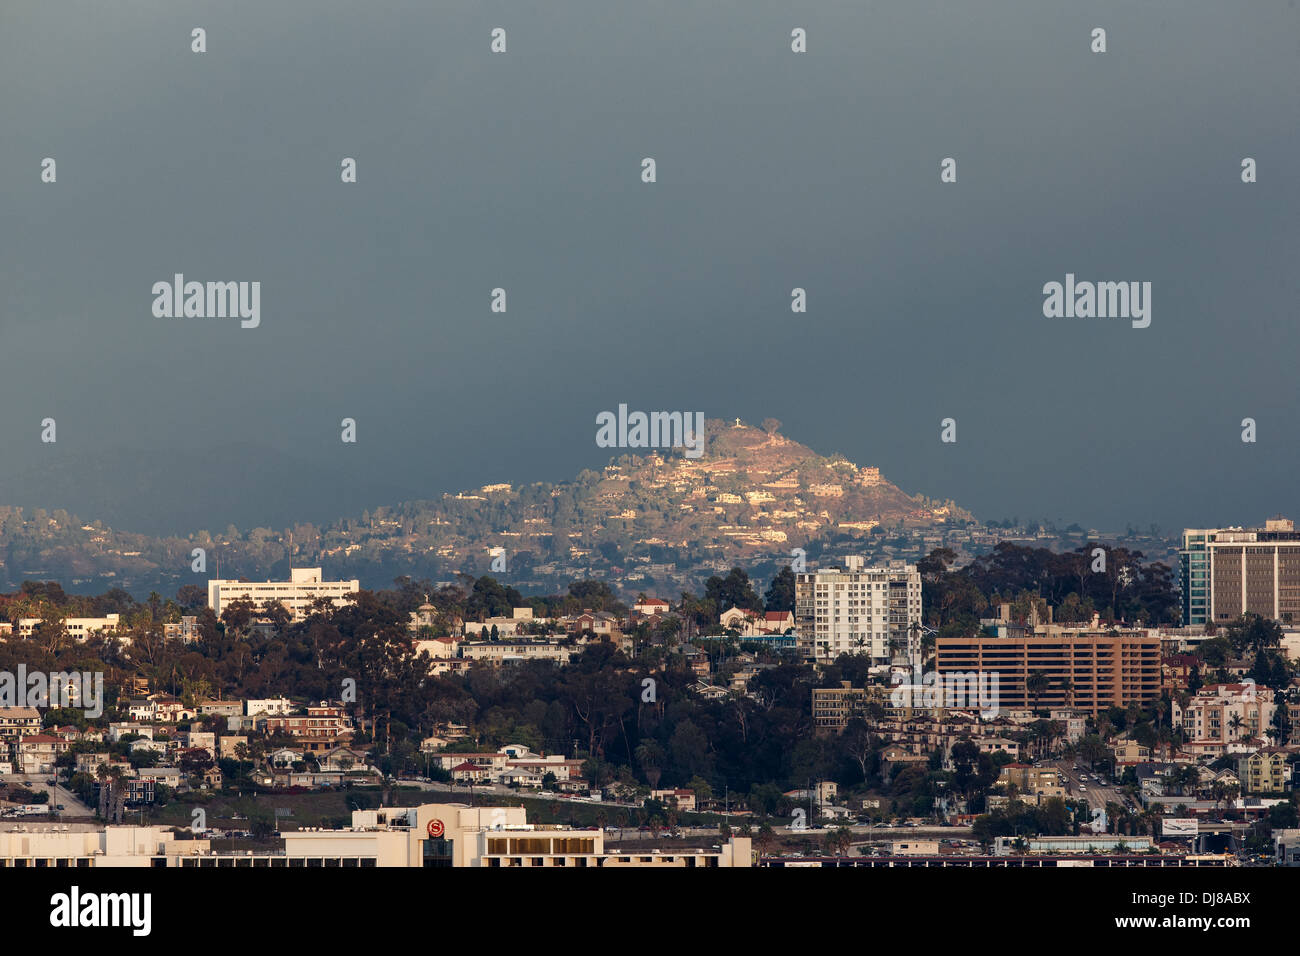 A view of Hillcrest and Balboa Park in San Diego, Mount Helix in La Mesa is lit by sun in the background. Stock Photo